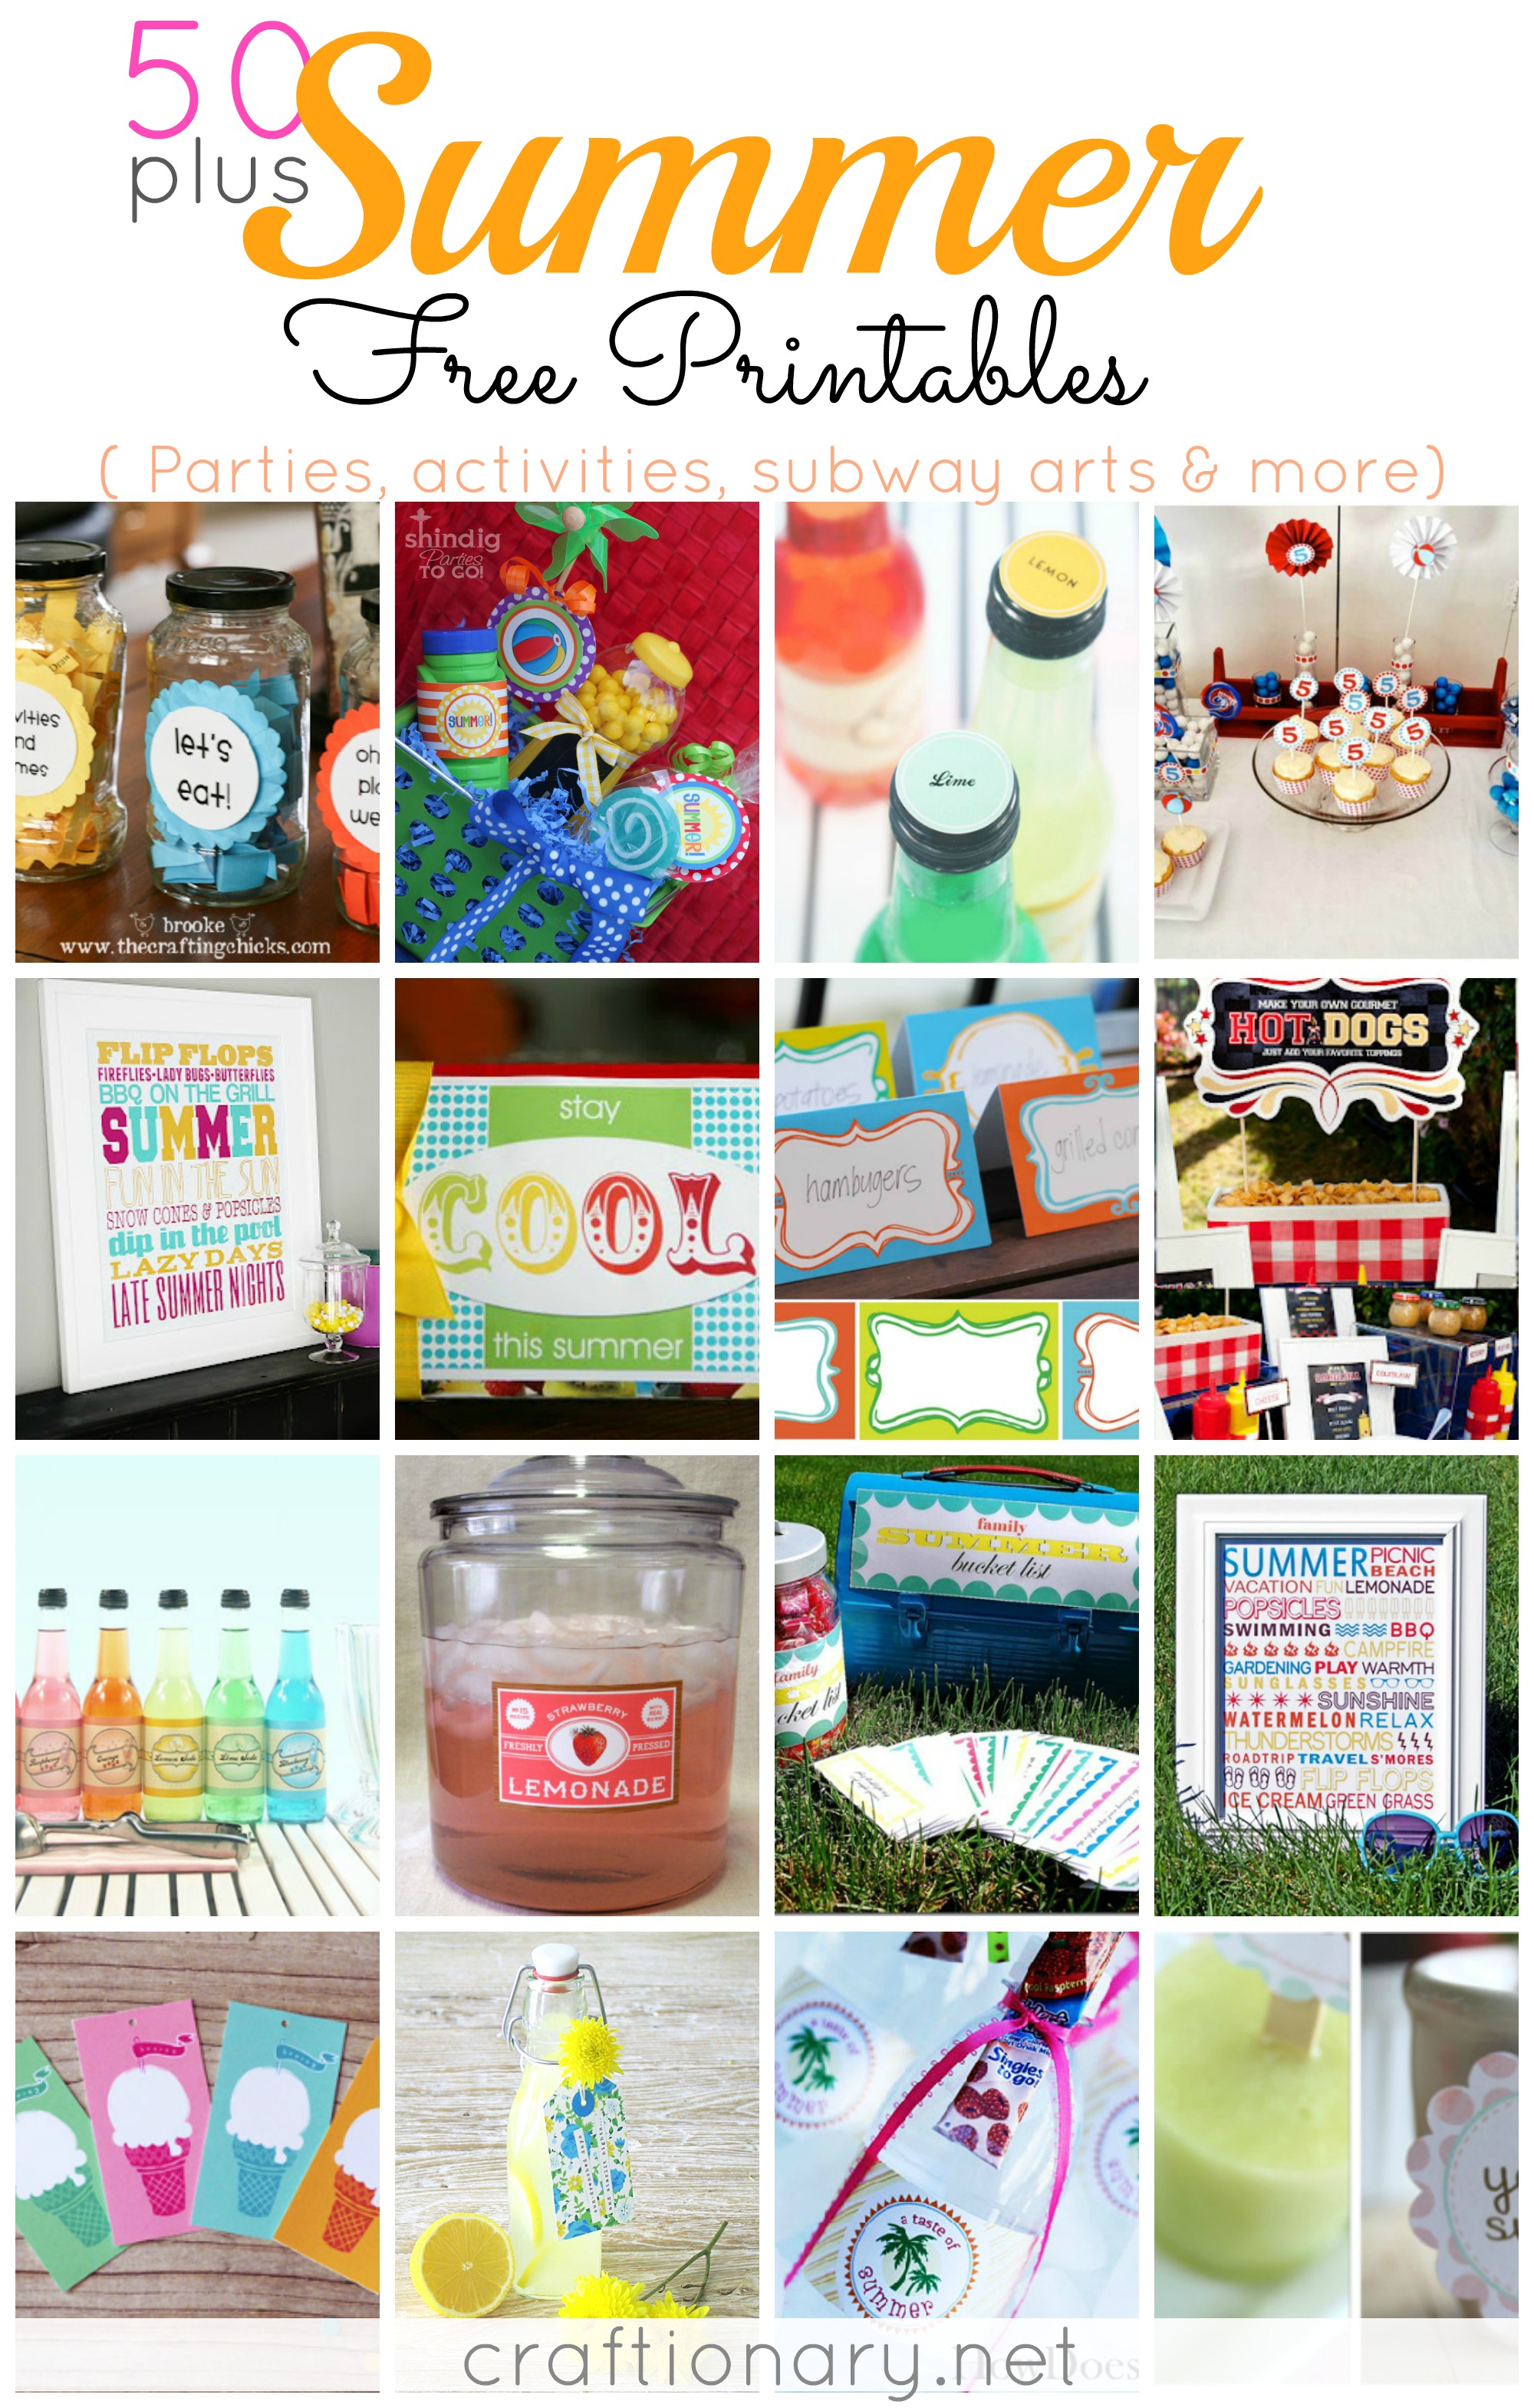 SUMMER FREE PRINTABLES to print